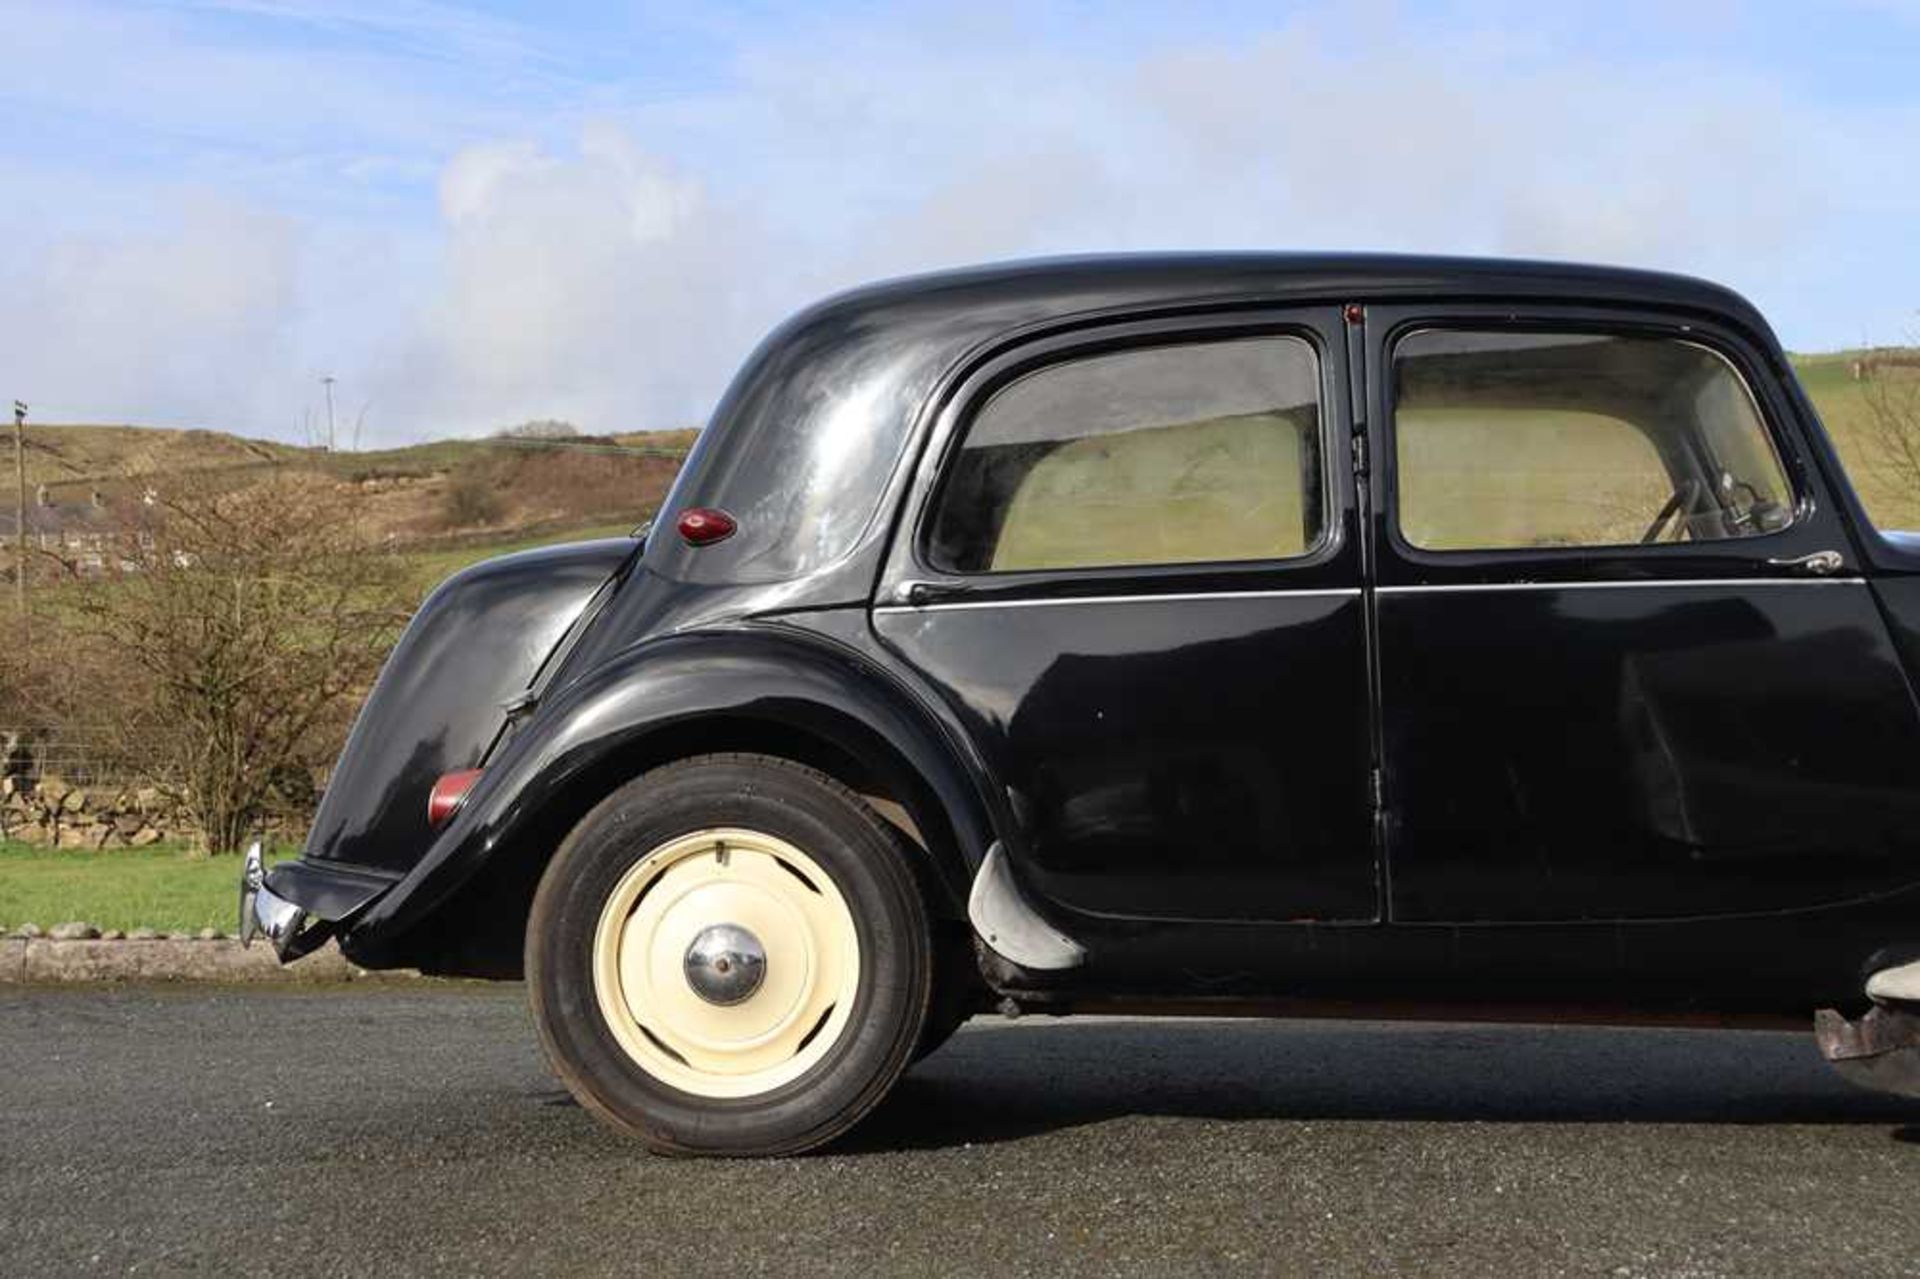 1952 Citroën 11BL Traction Avant In current ownership for over 40 years - Image 27 of 60